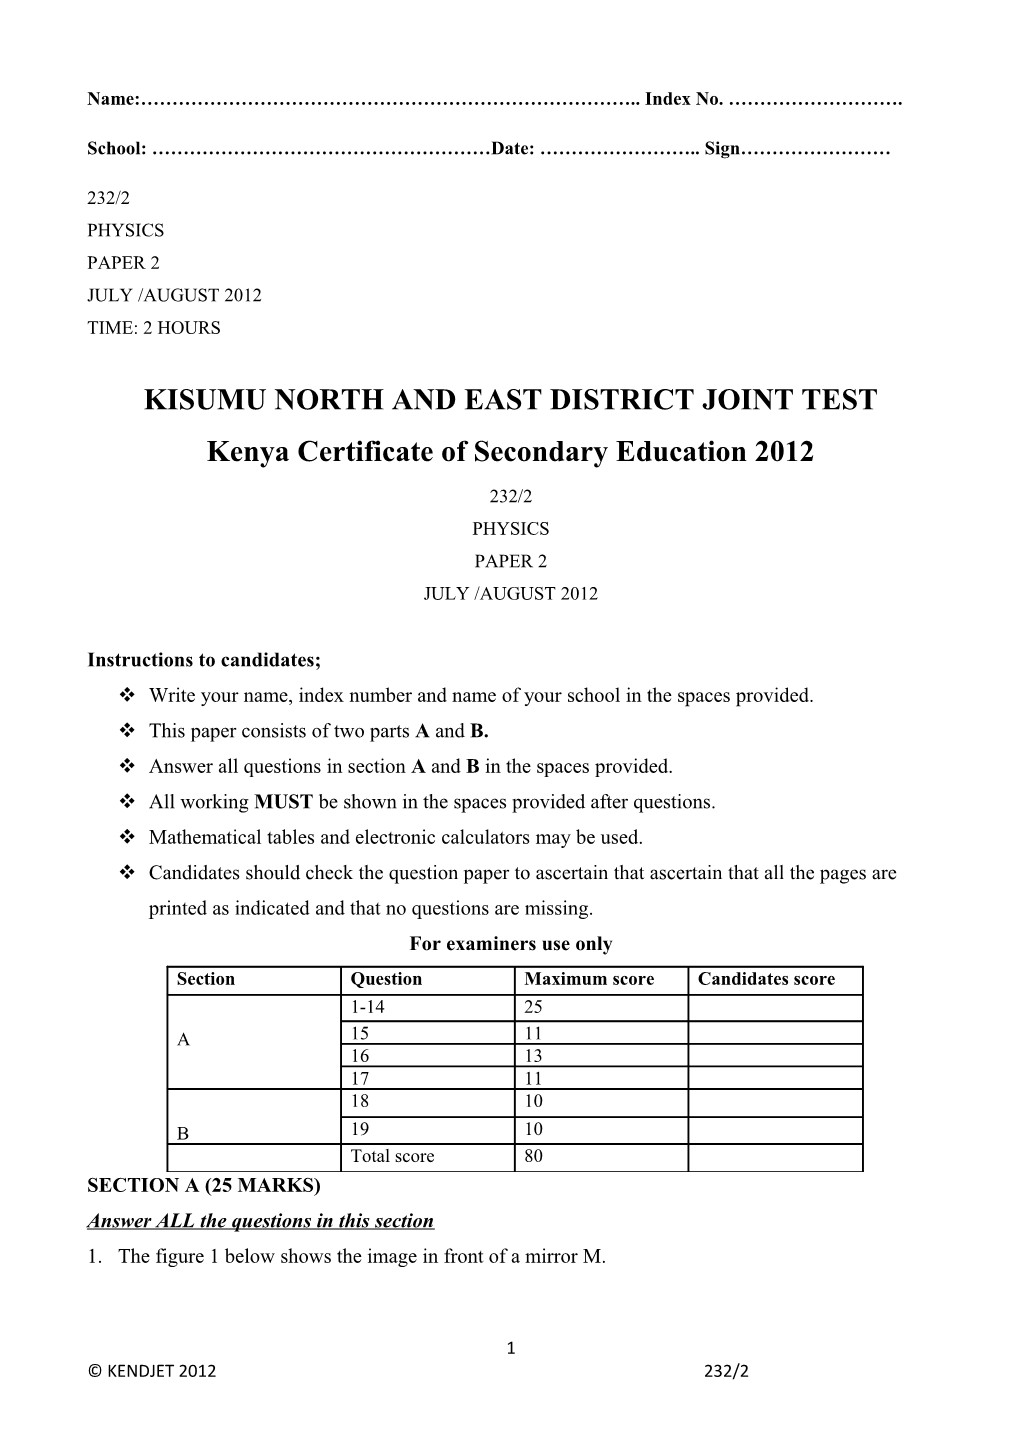 Kisumu North and East District Joint Test